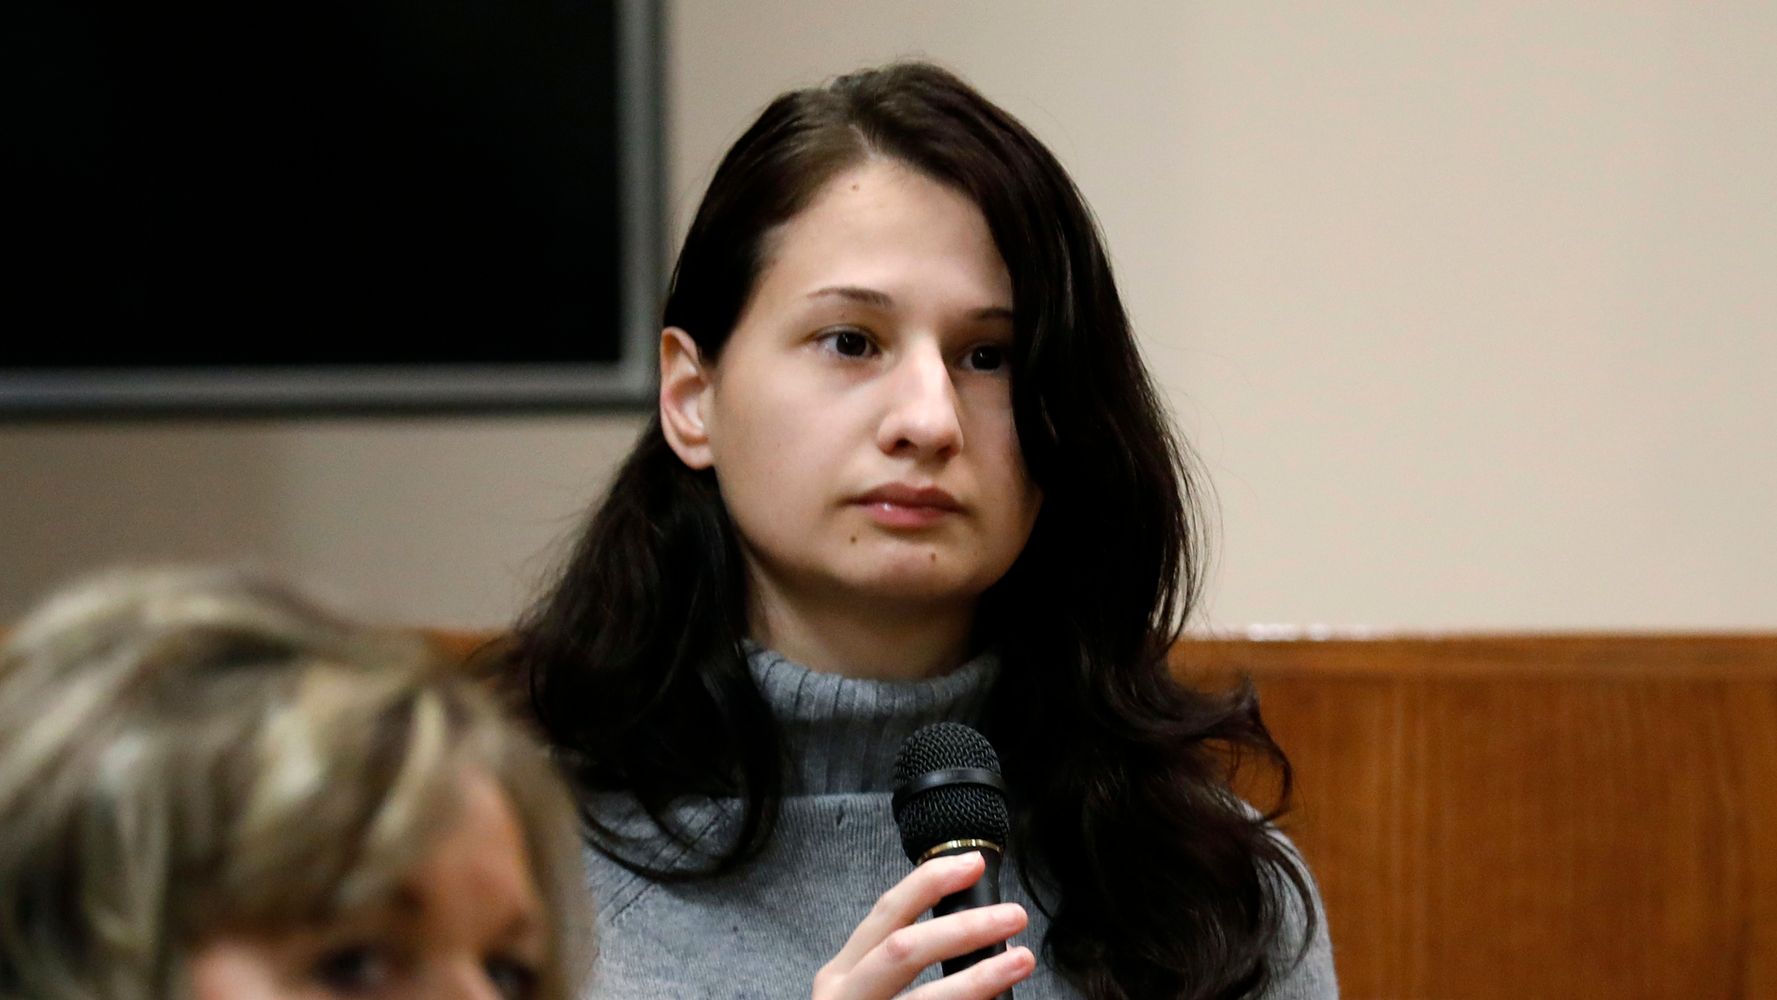 Gypsy Blanchard 'just looking forward' while imprisoned, stepmom says